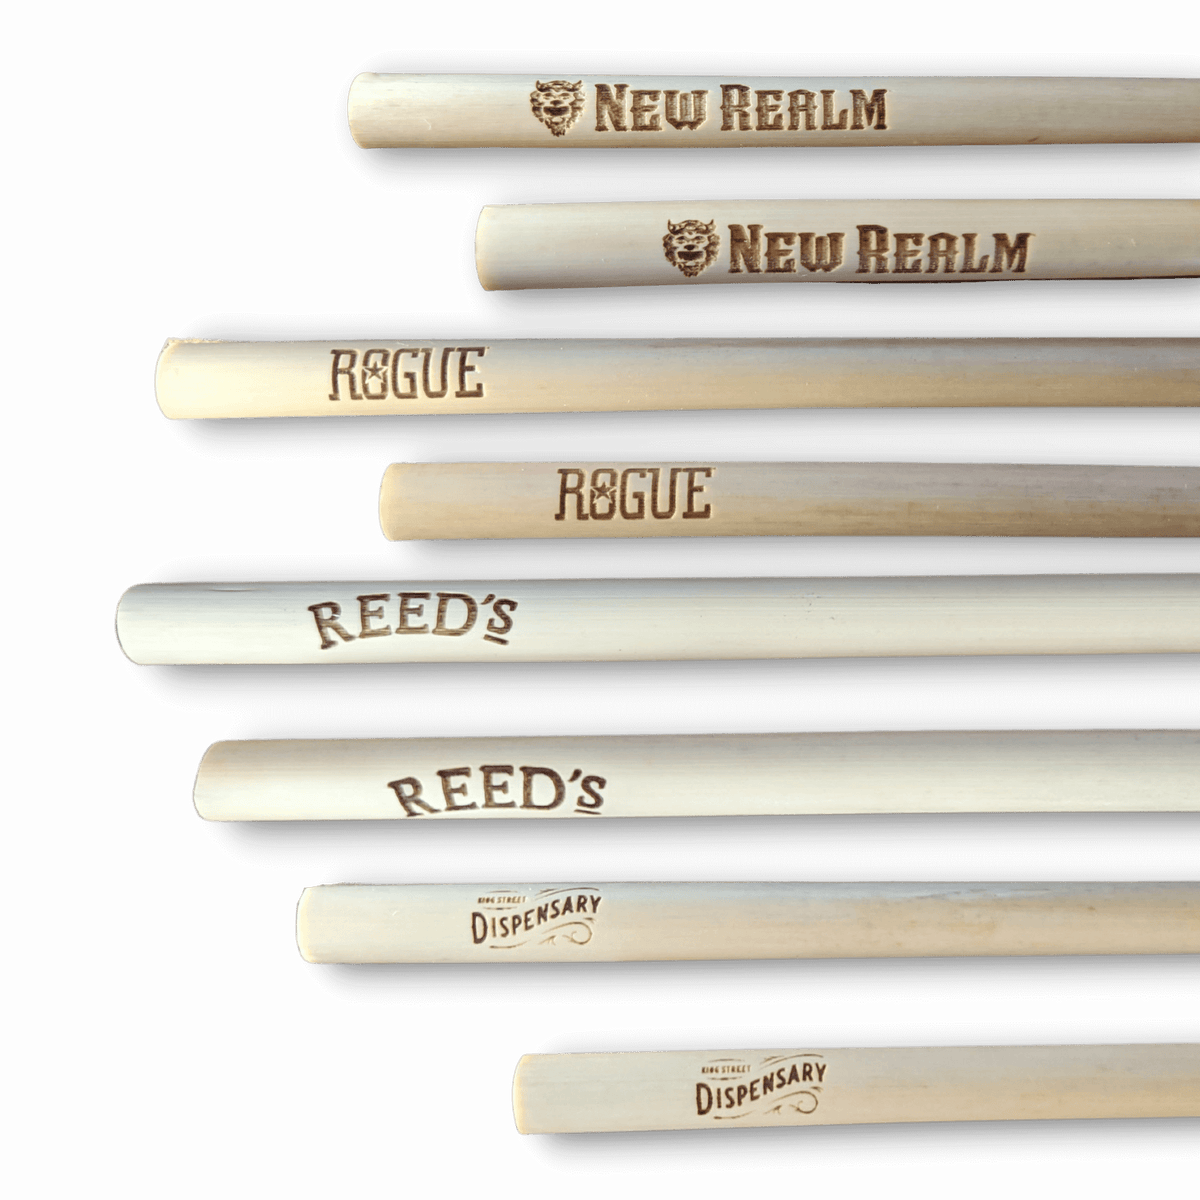 New Realm Rouge and Reed laser engraved reed stem straw